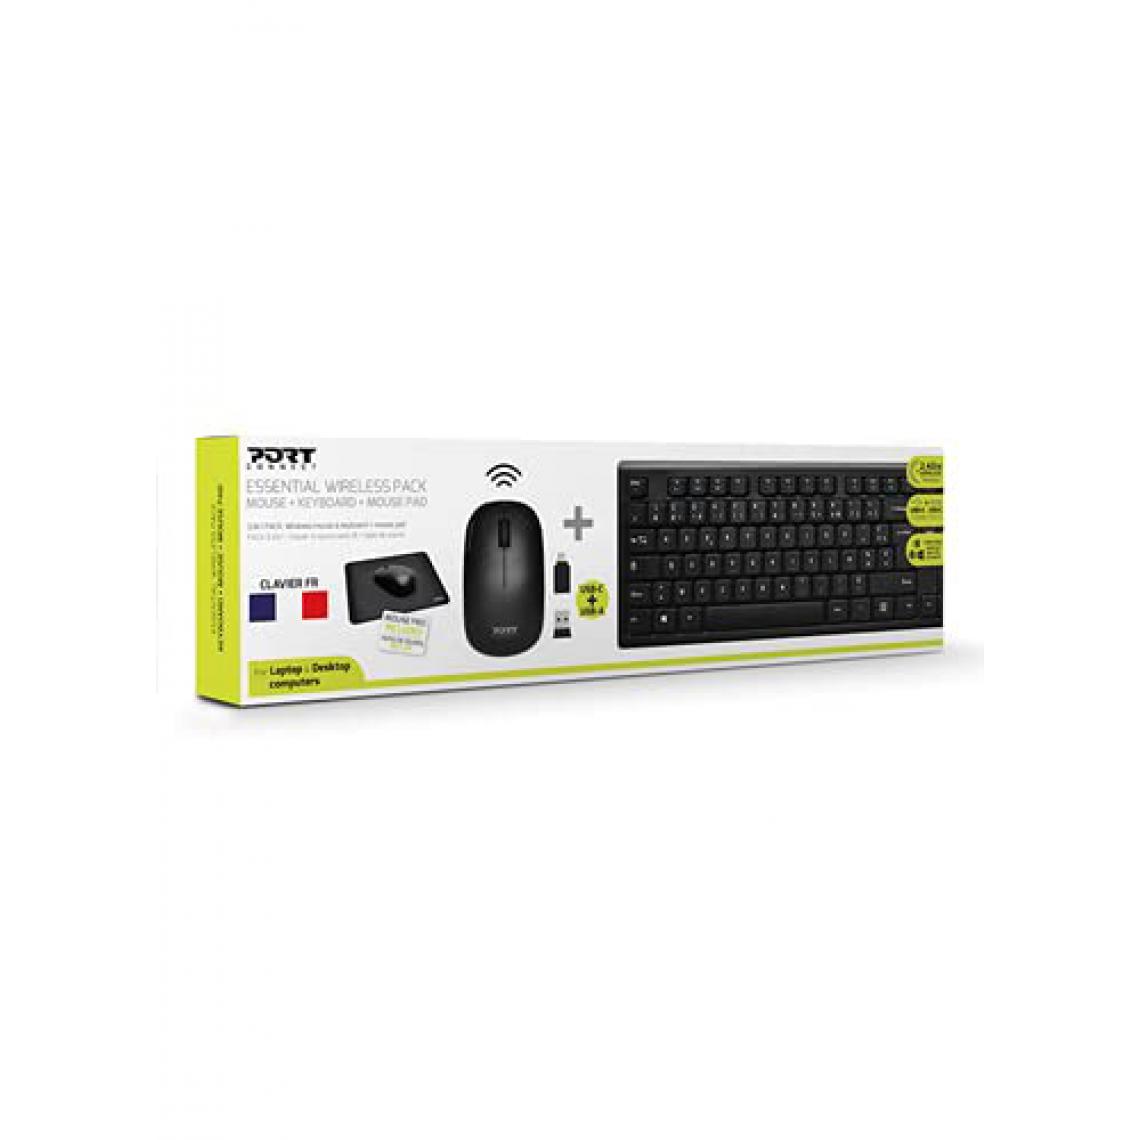 Port Design - Pack Kbd+Mouse+Pad (FR) Pack Keyboard + Mouse + Pad Wireless Budget (FR) - Pack Clavier Souris